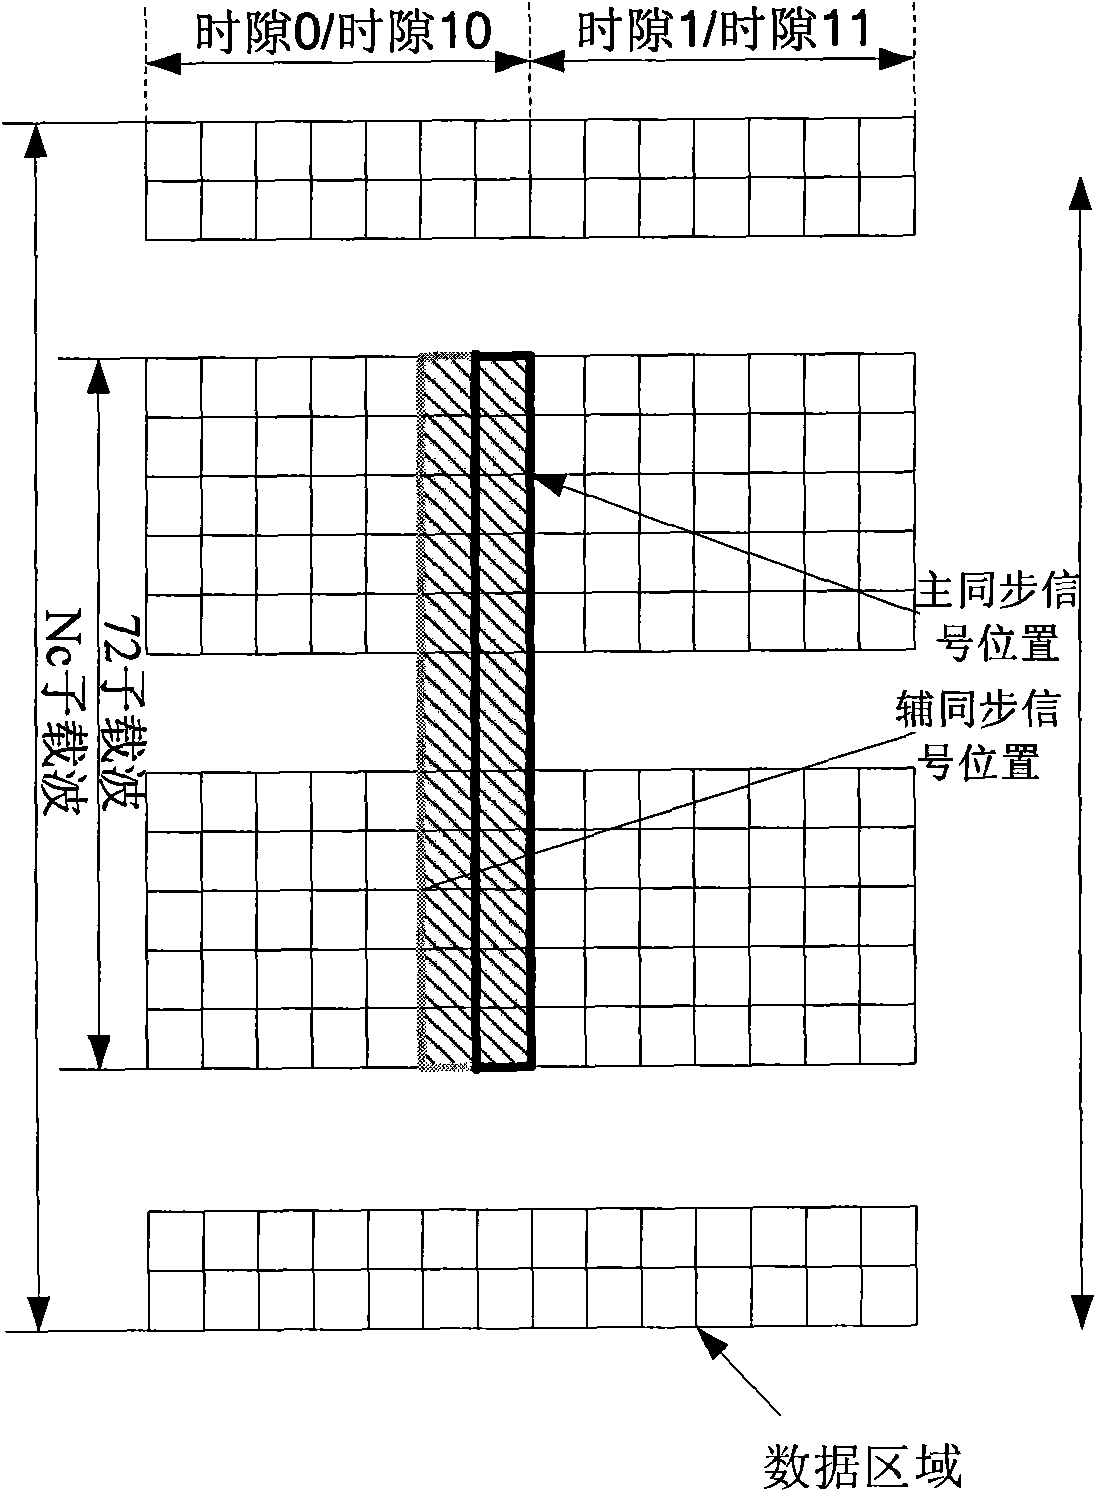 Method and device for capturing frequency deviation